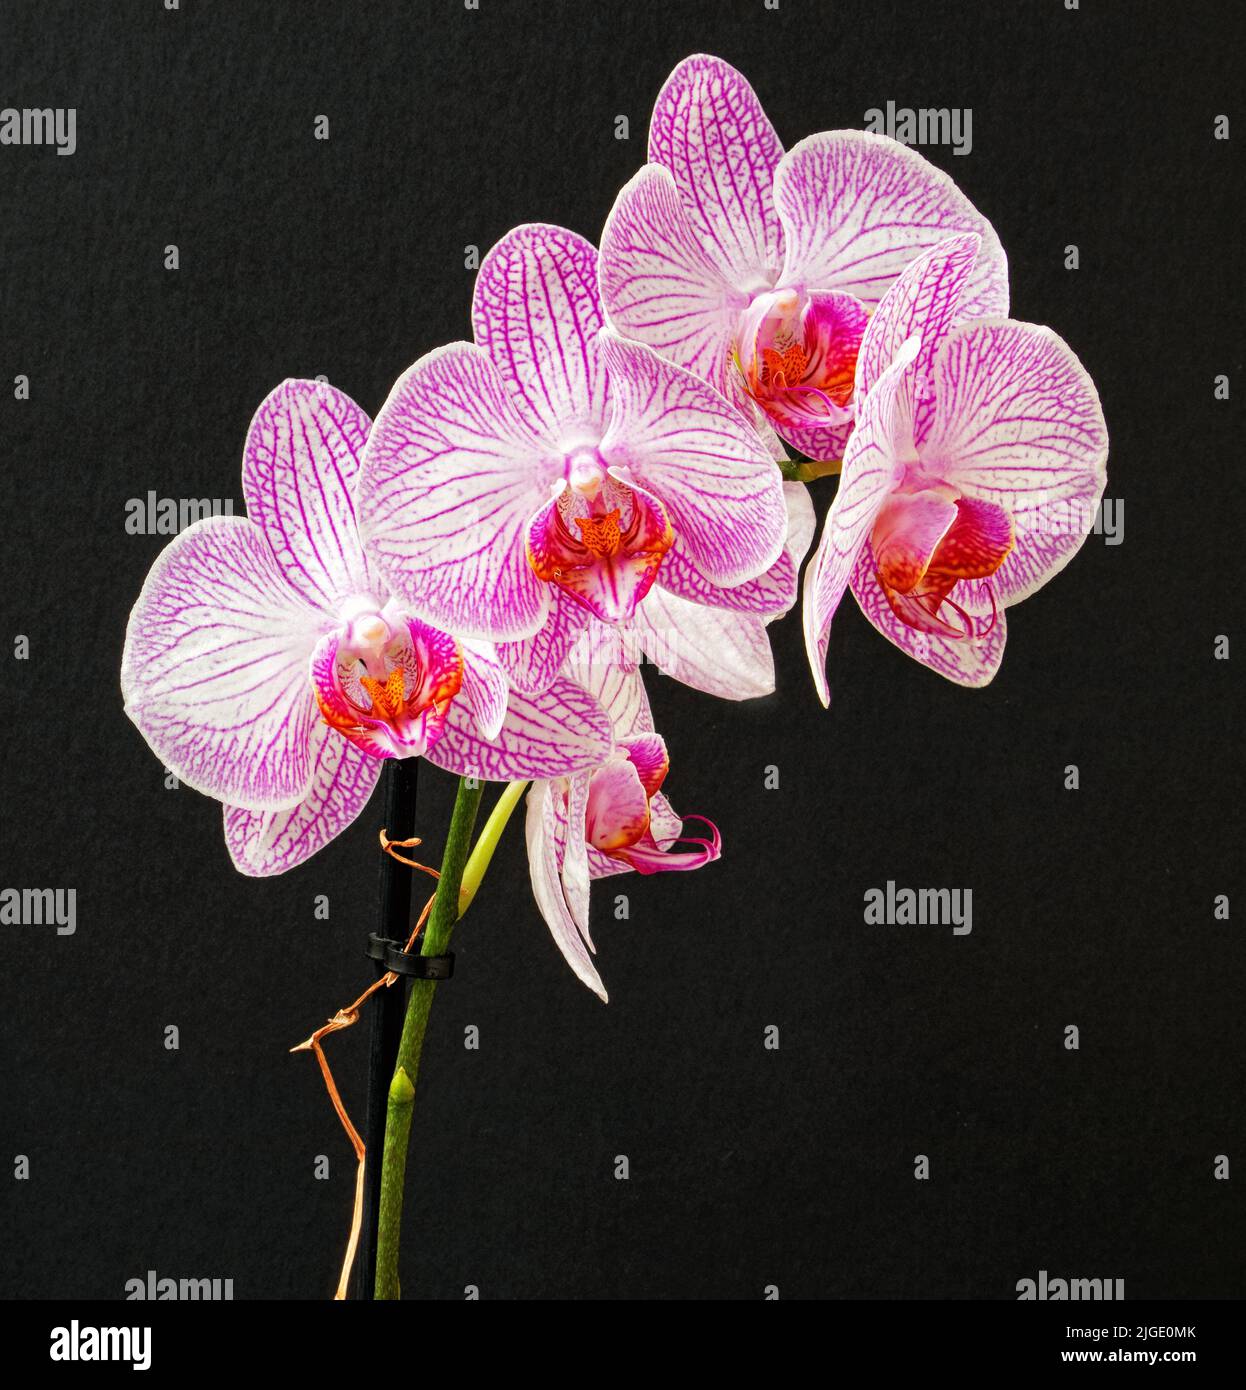 Orchid against a black background Stock Photo